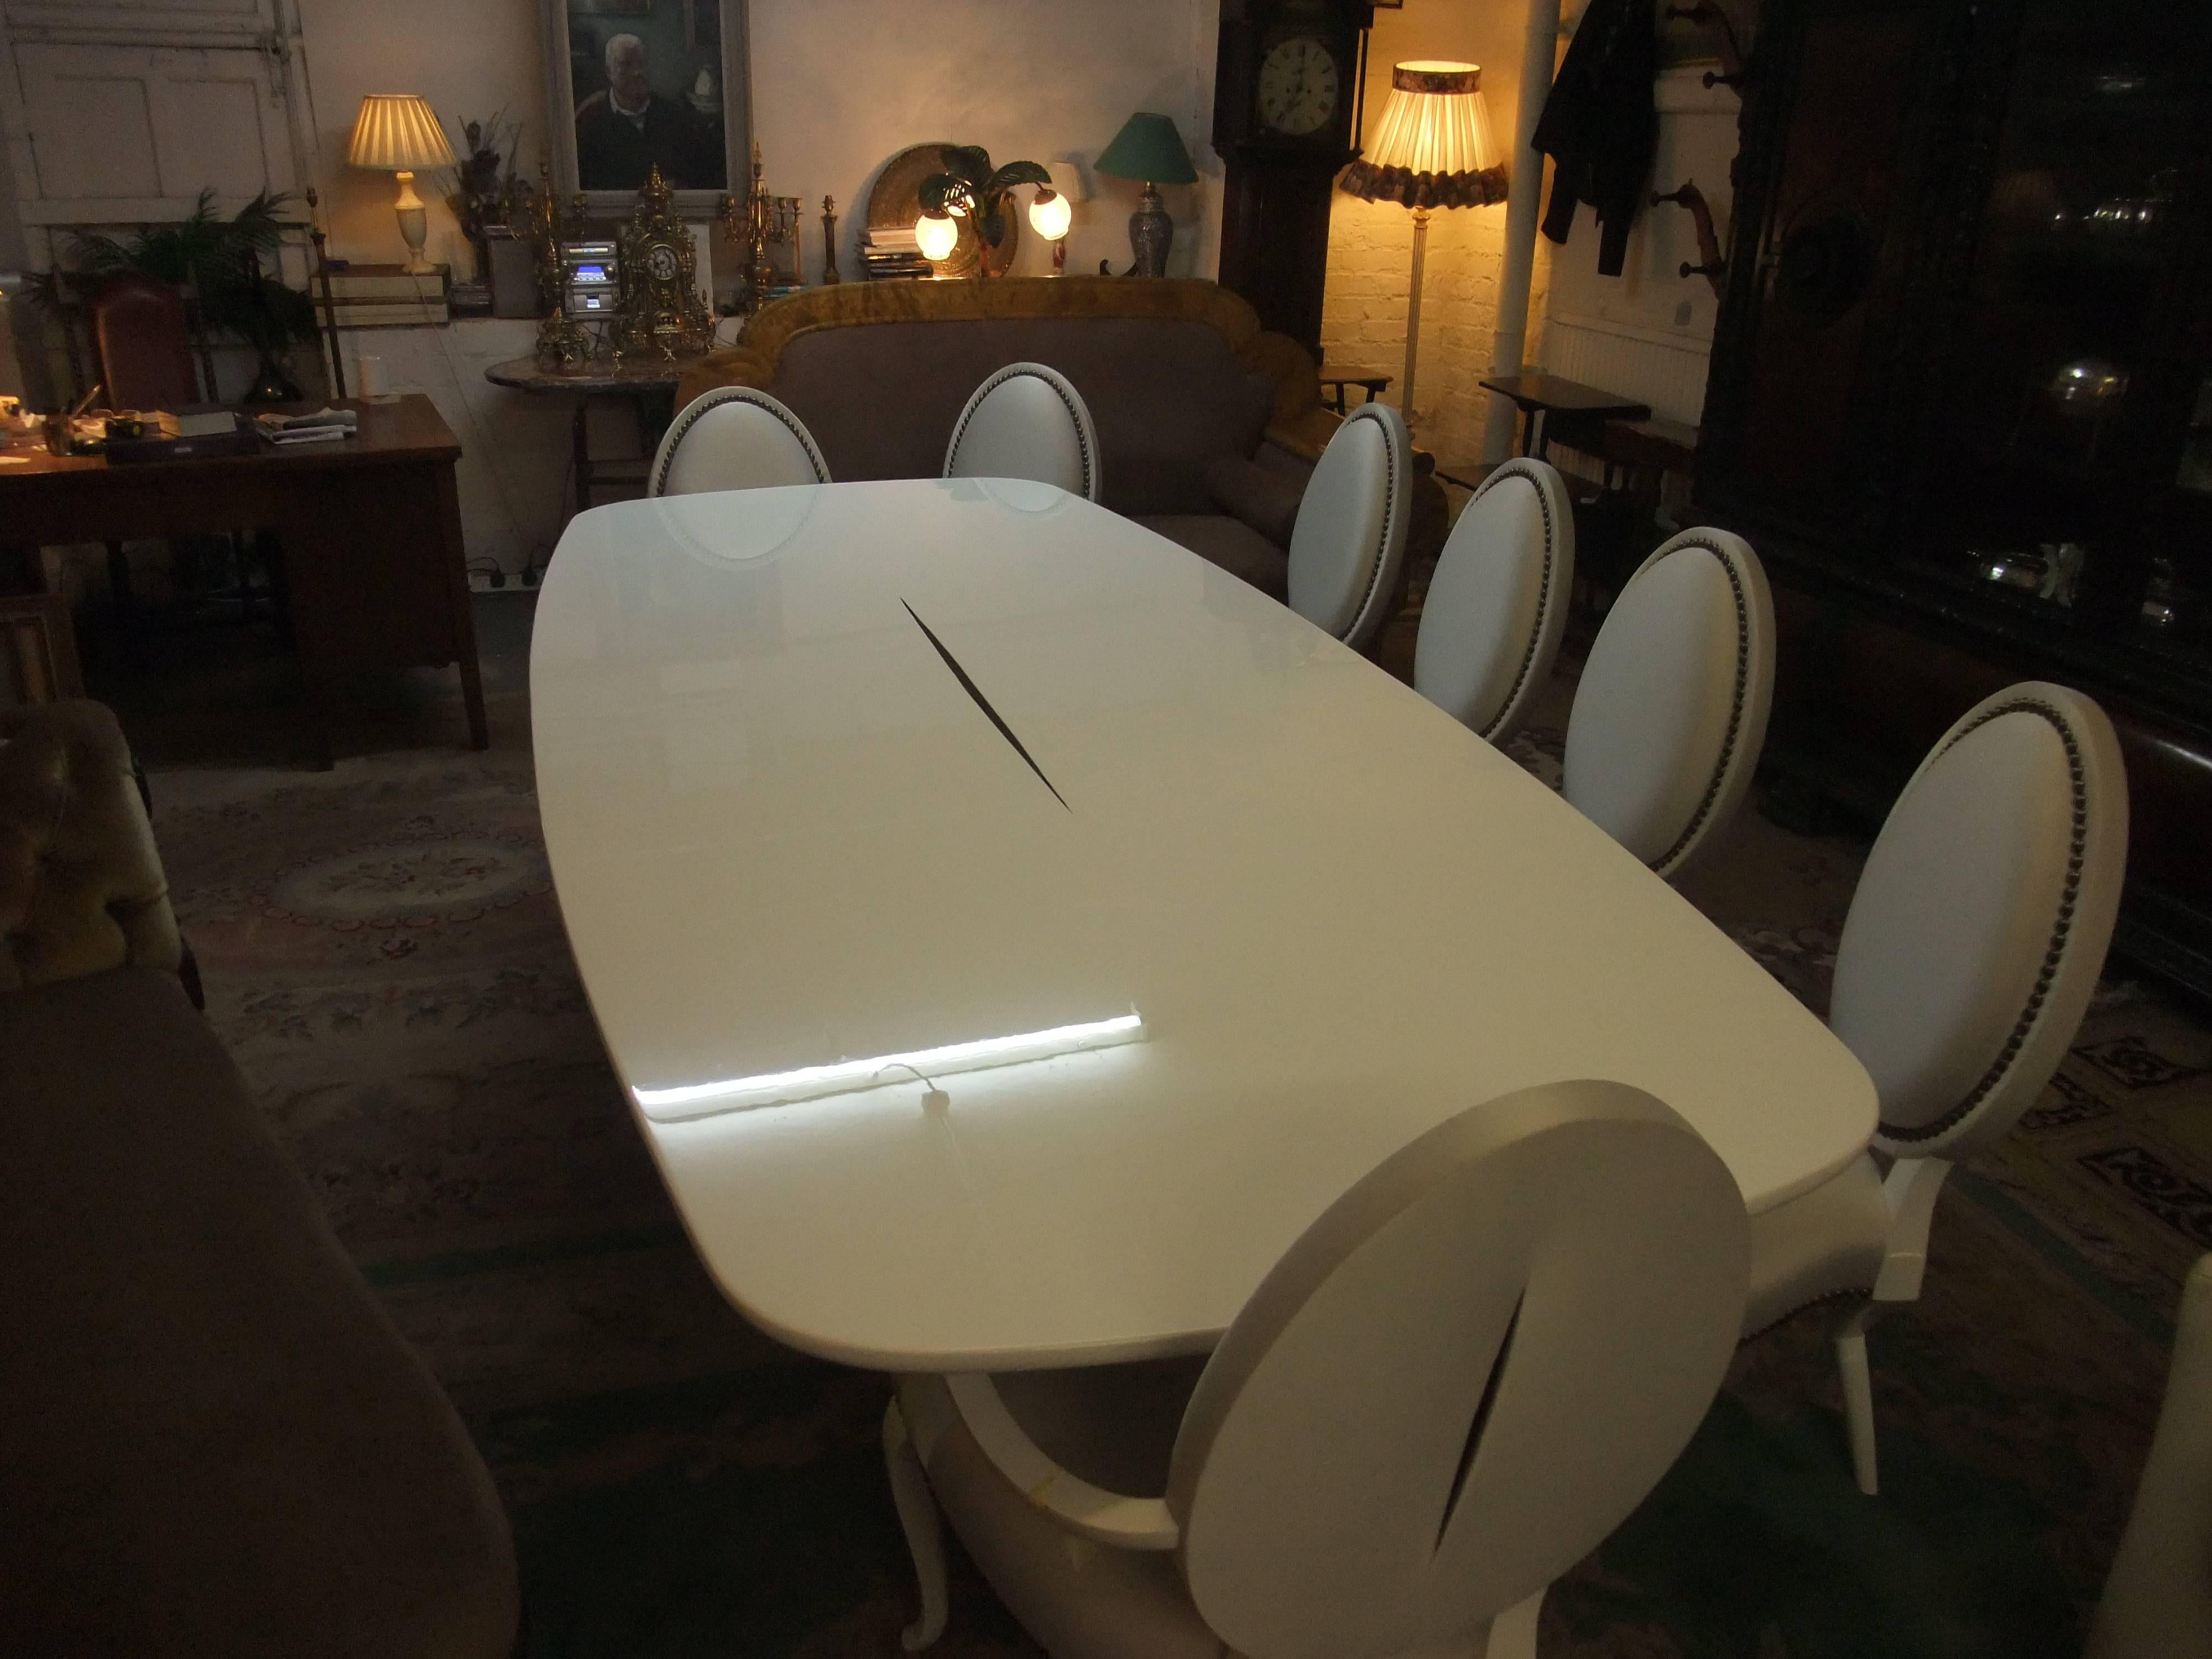 White enamel dining room suite consisting of two carvers, five side chairs, and table, all by Christopher Guy (liquidated stock). Undamaged and ready for assembly. Approximately £22,000 worth of furniture and still in production today. Chairs